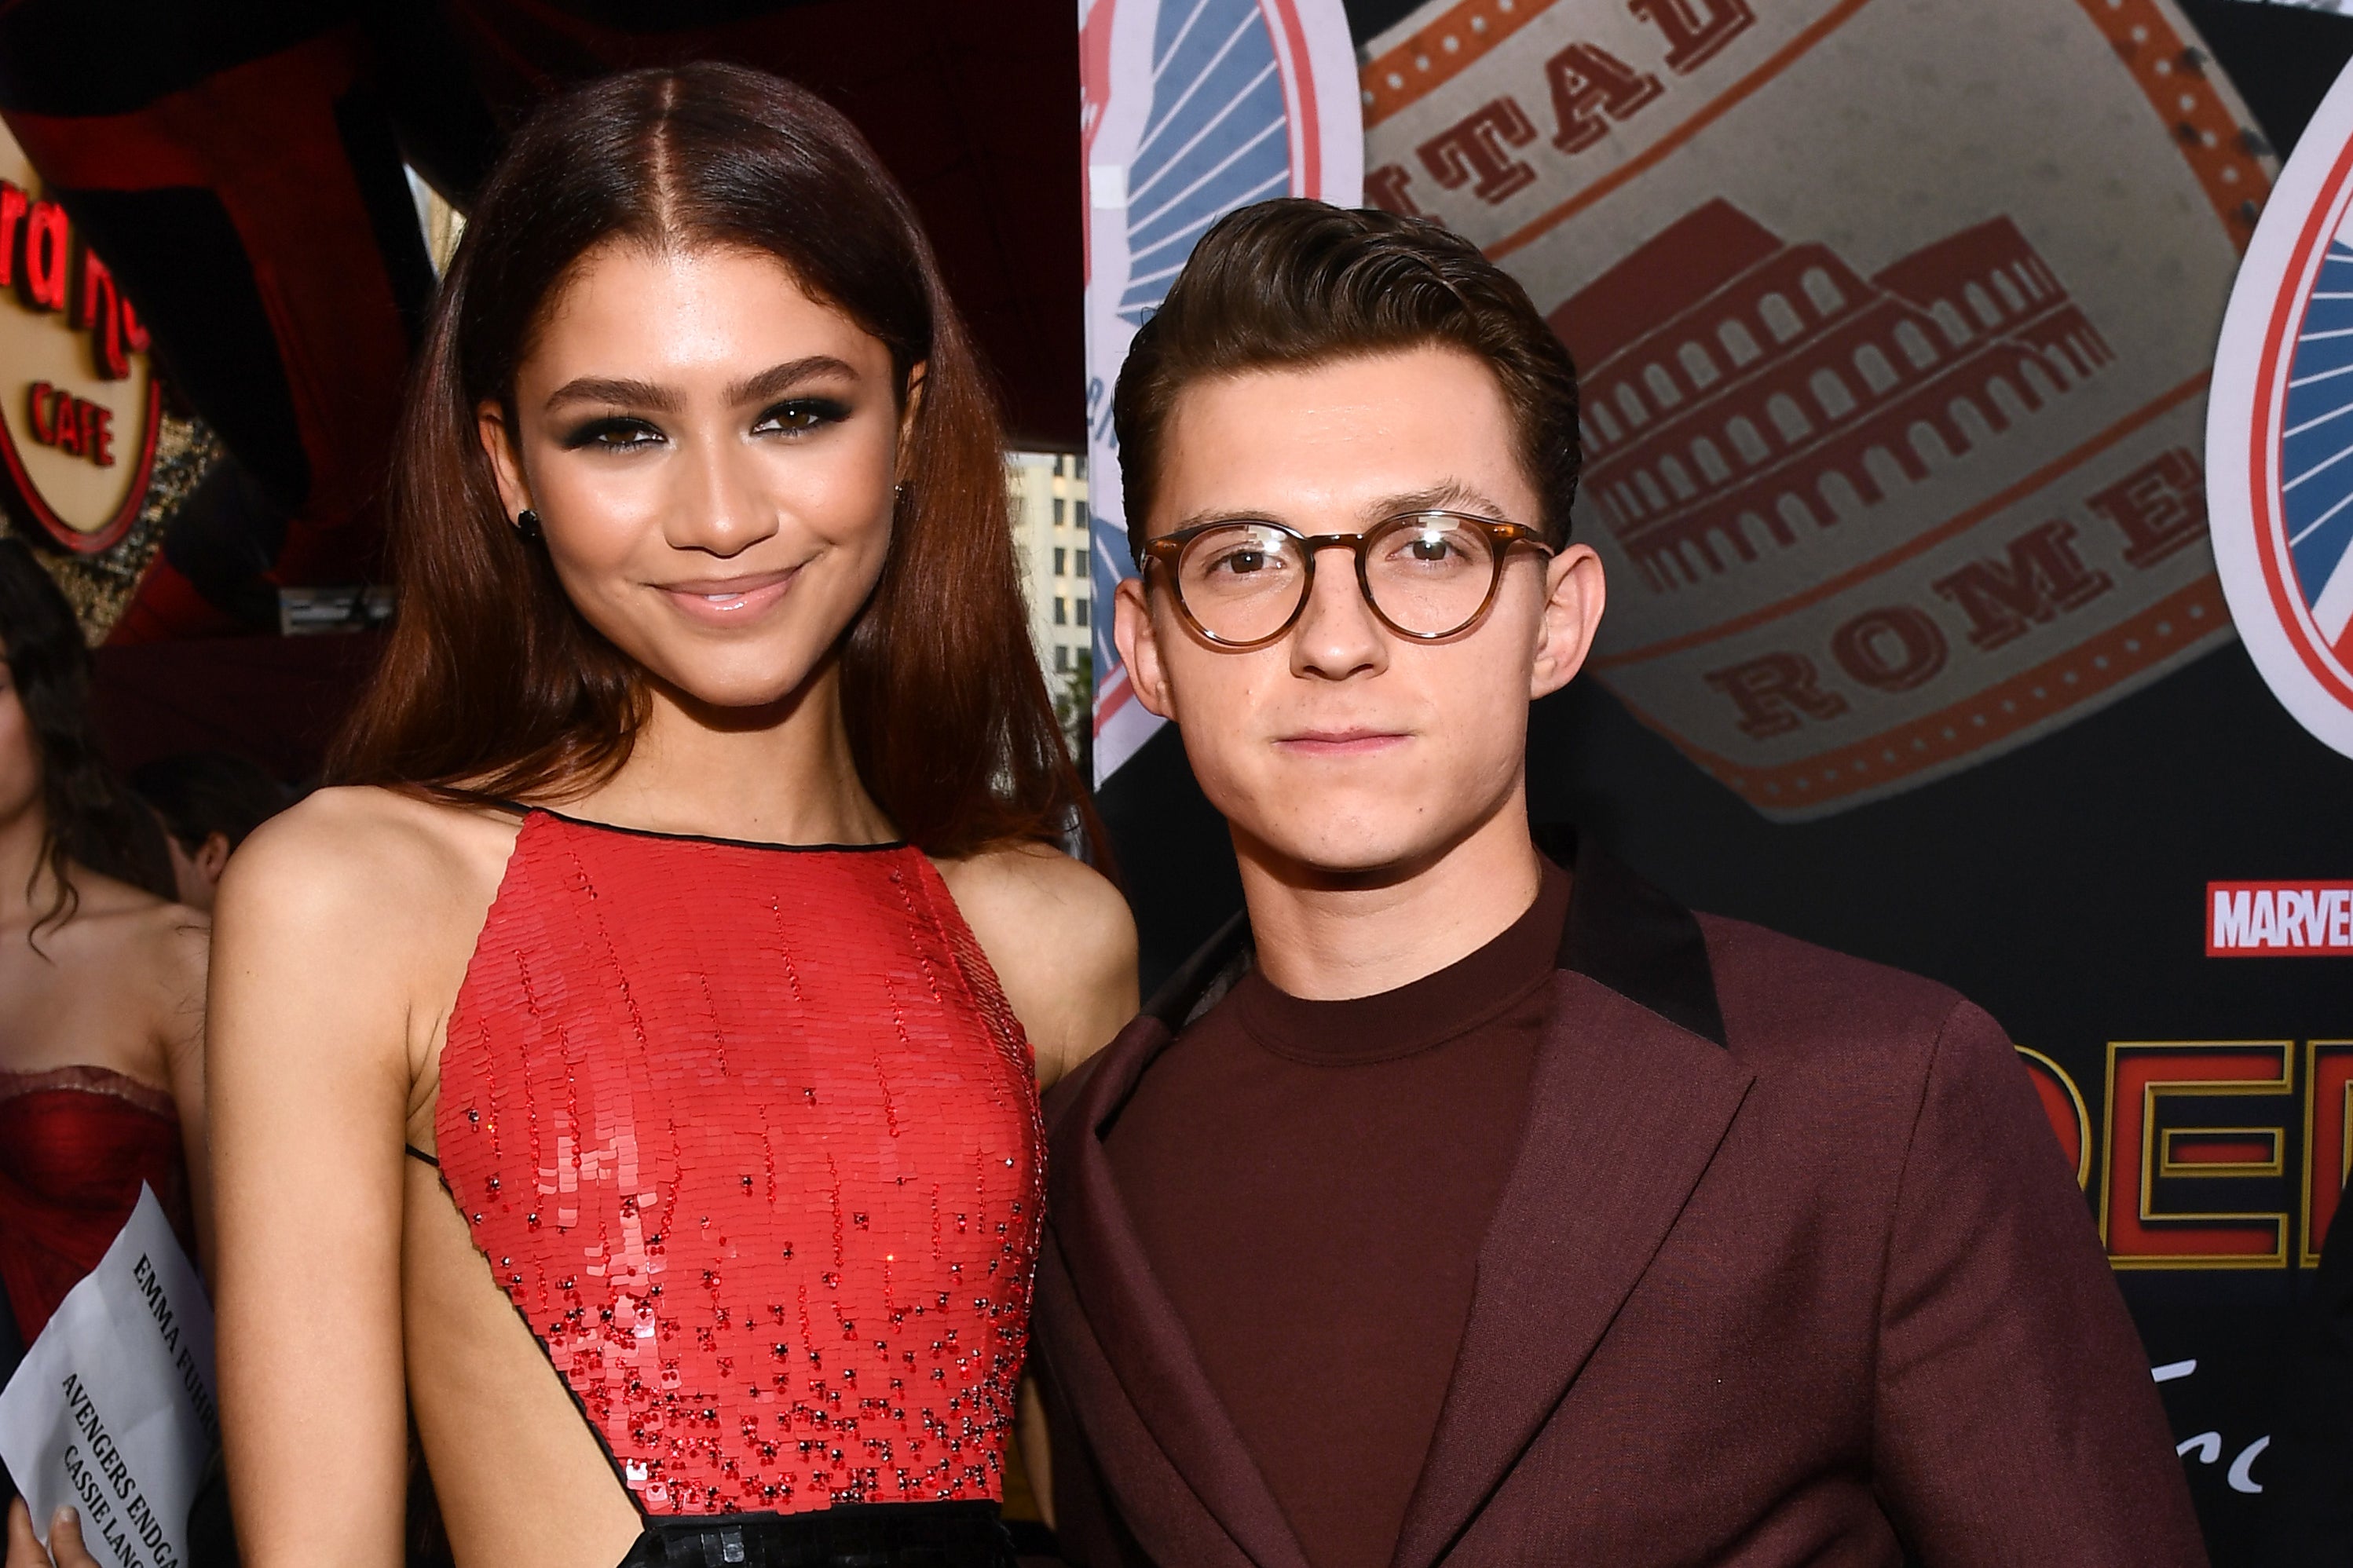 There Are New Reports About Zendaya And Tom Holland's Relationship After Those Breakup Rumors